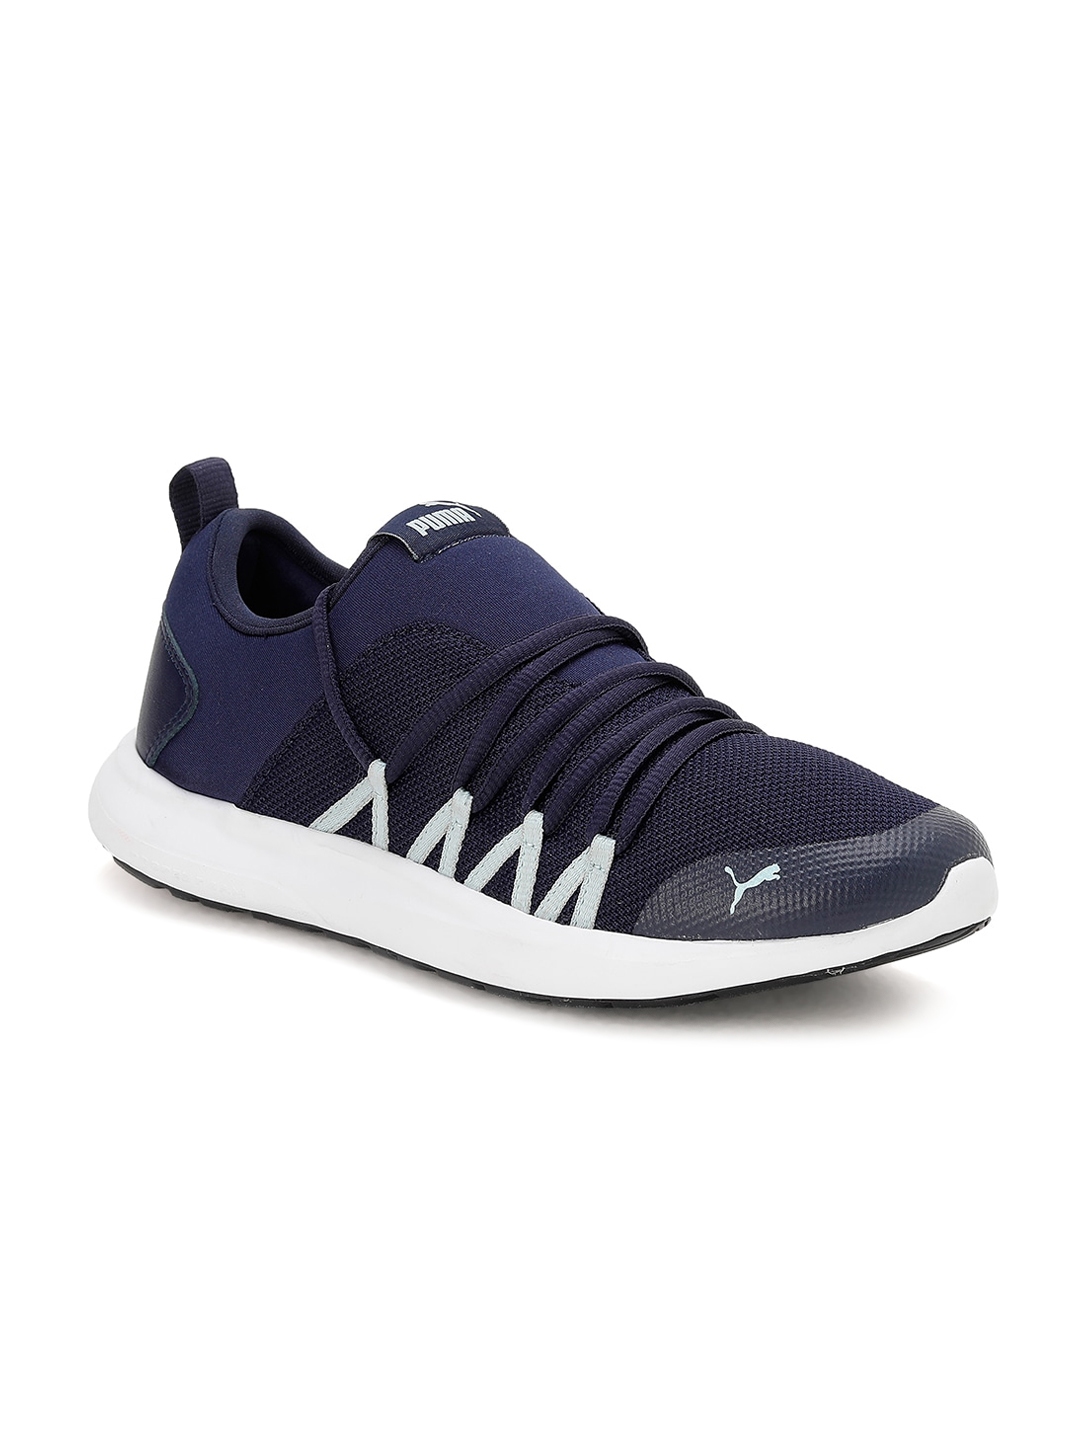 Buy Puma Women Navy Blue Woven Design Slip On Sneakers - Casual Shoes ...